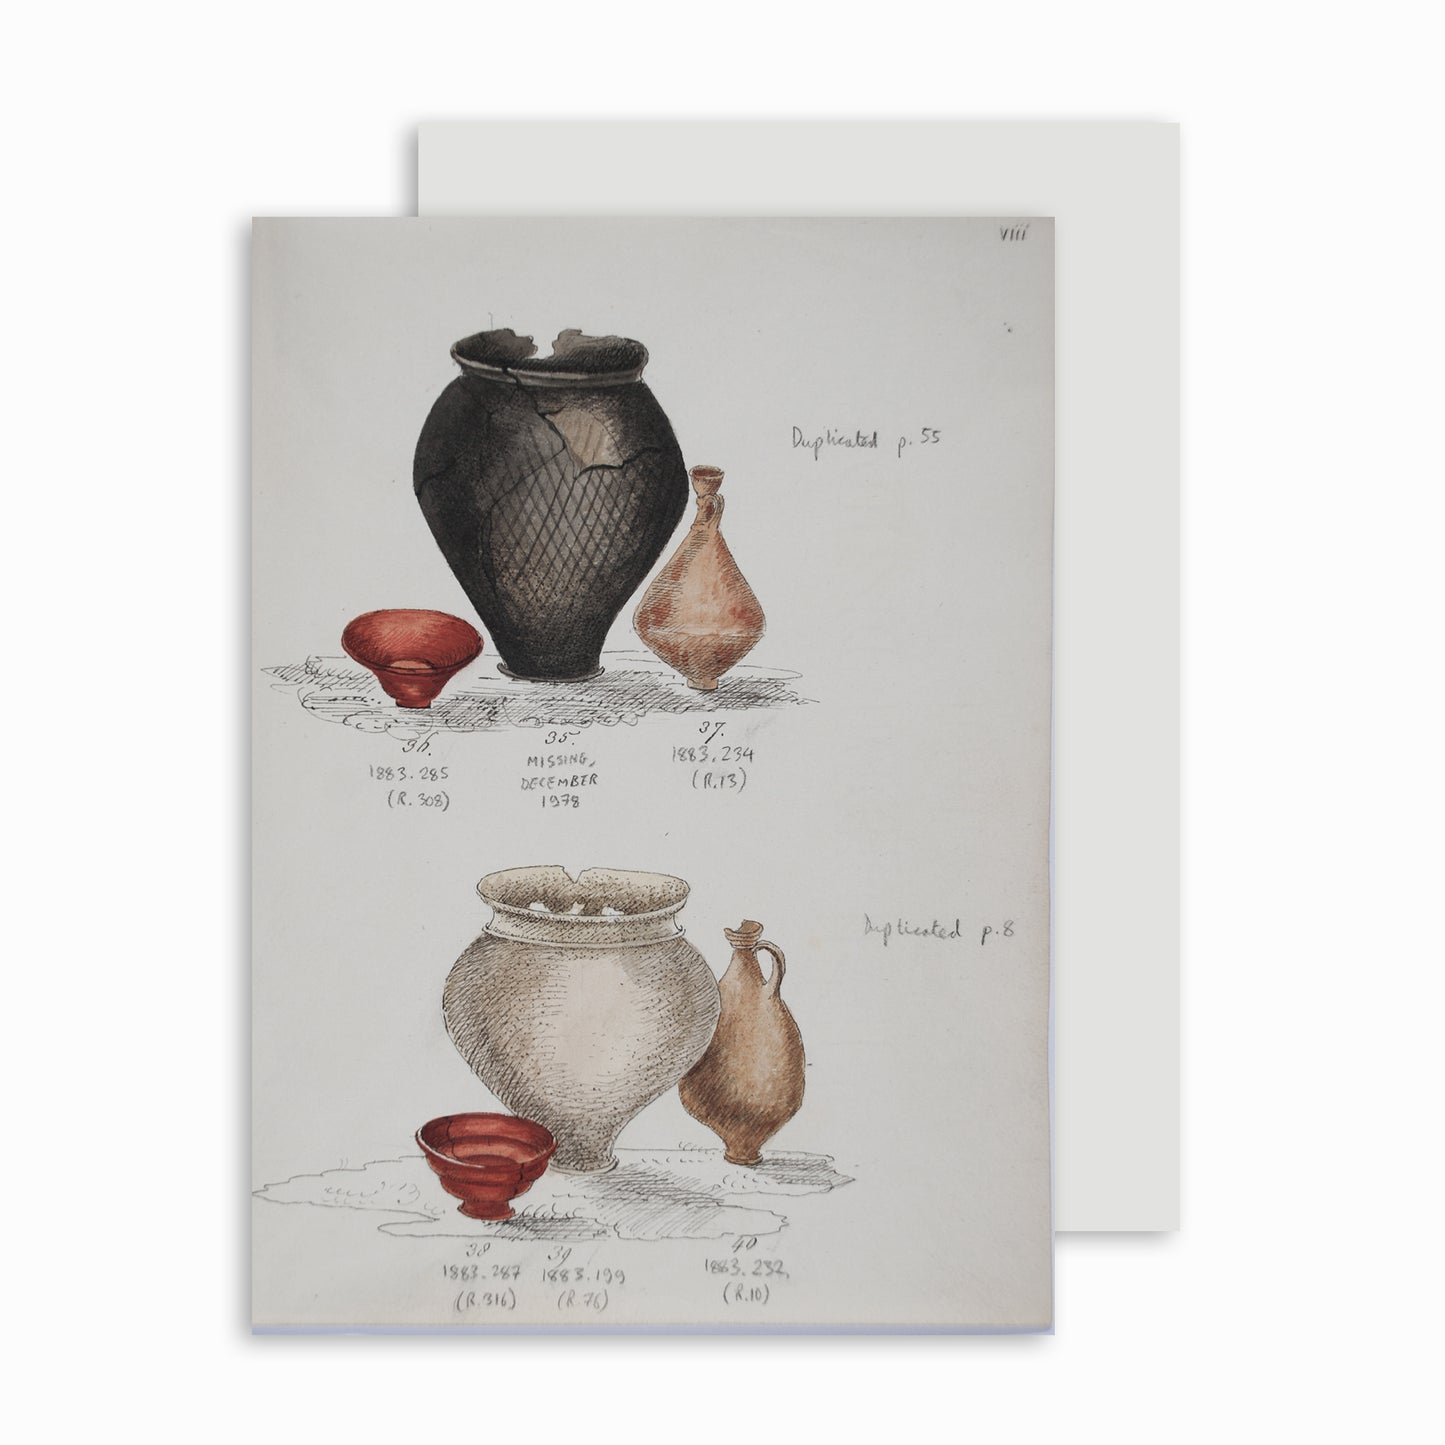 Pottery excavated from Litlington Roman cemetery - Greeting card